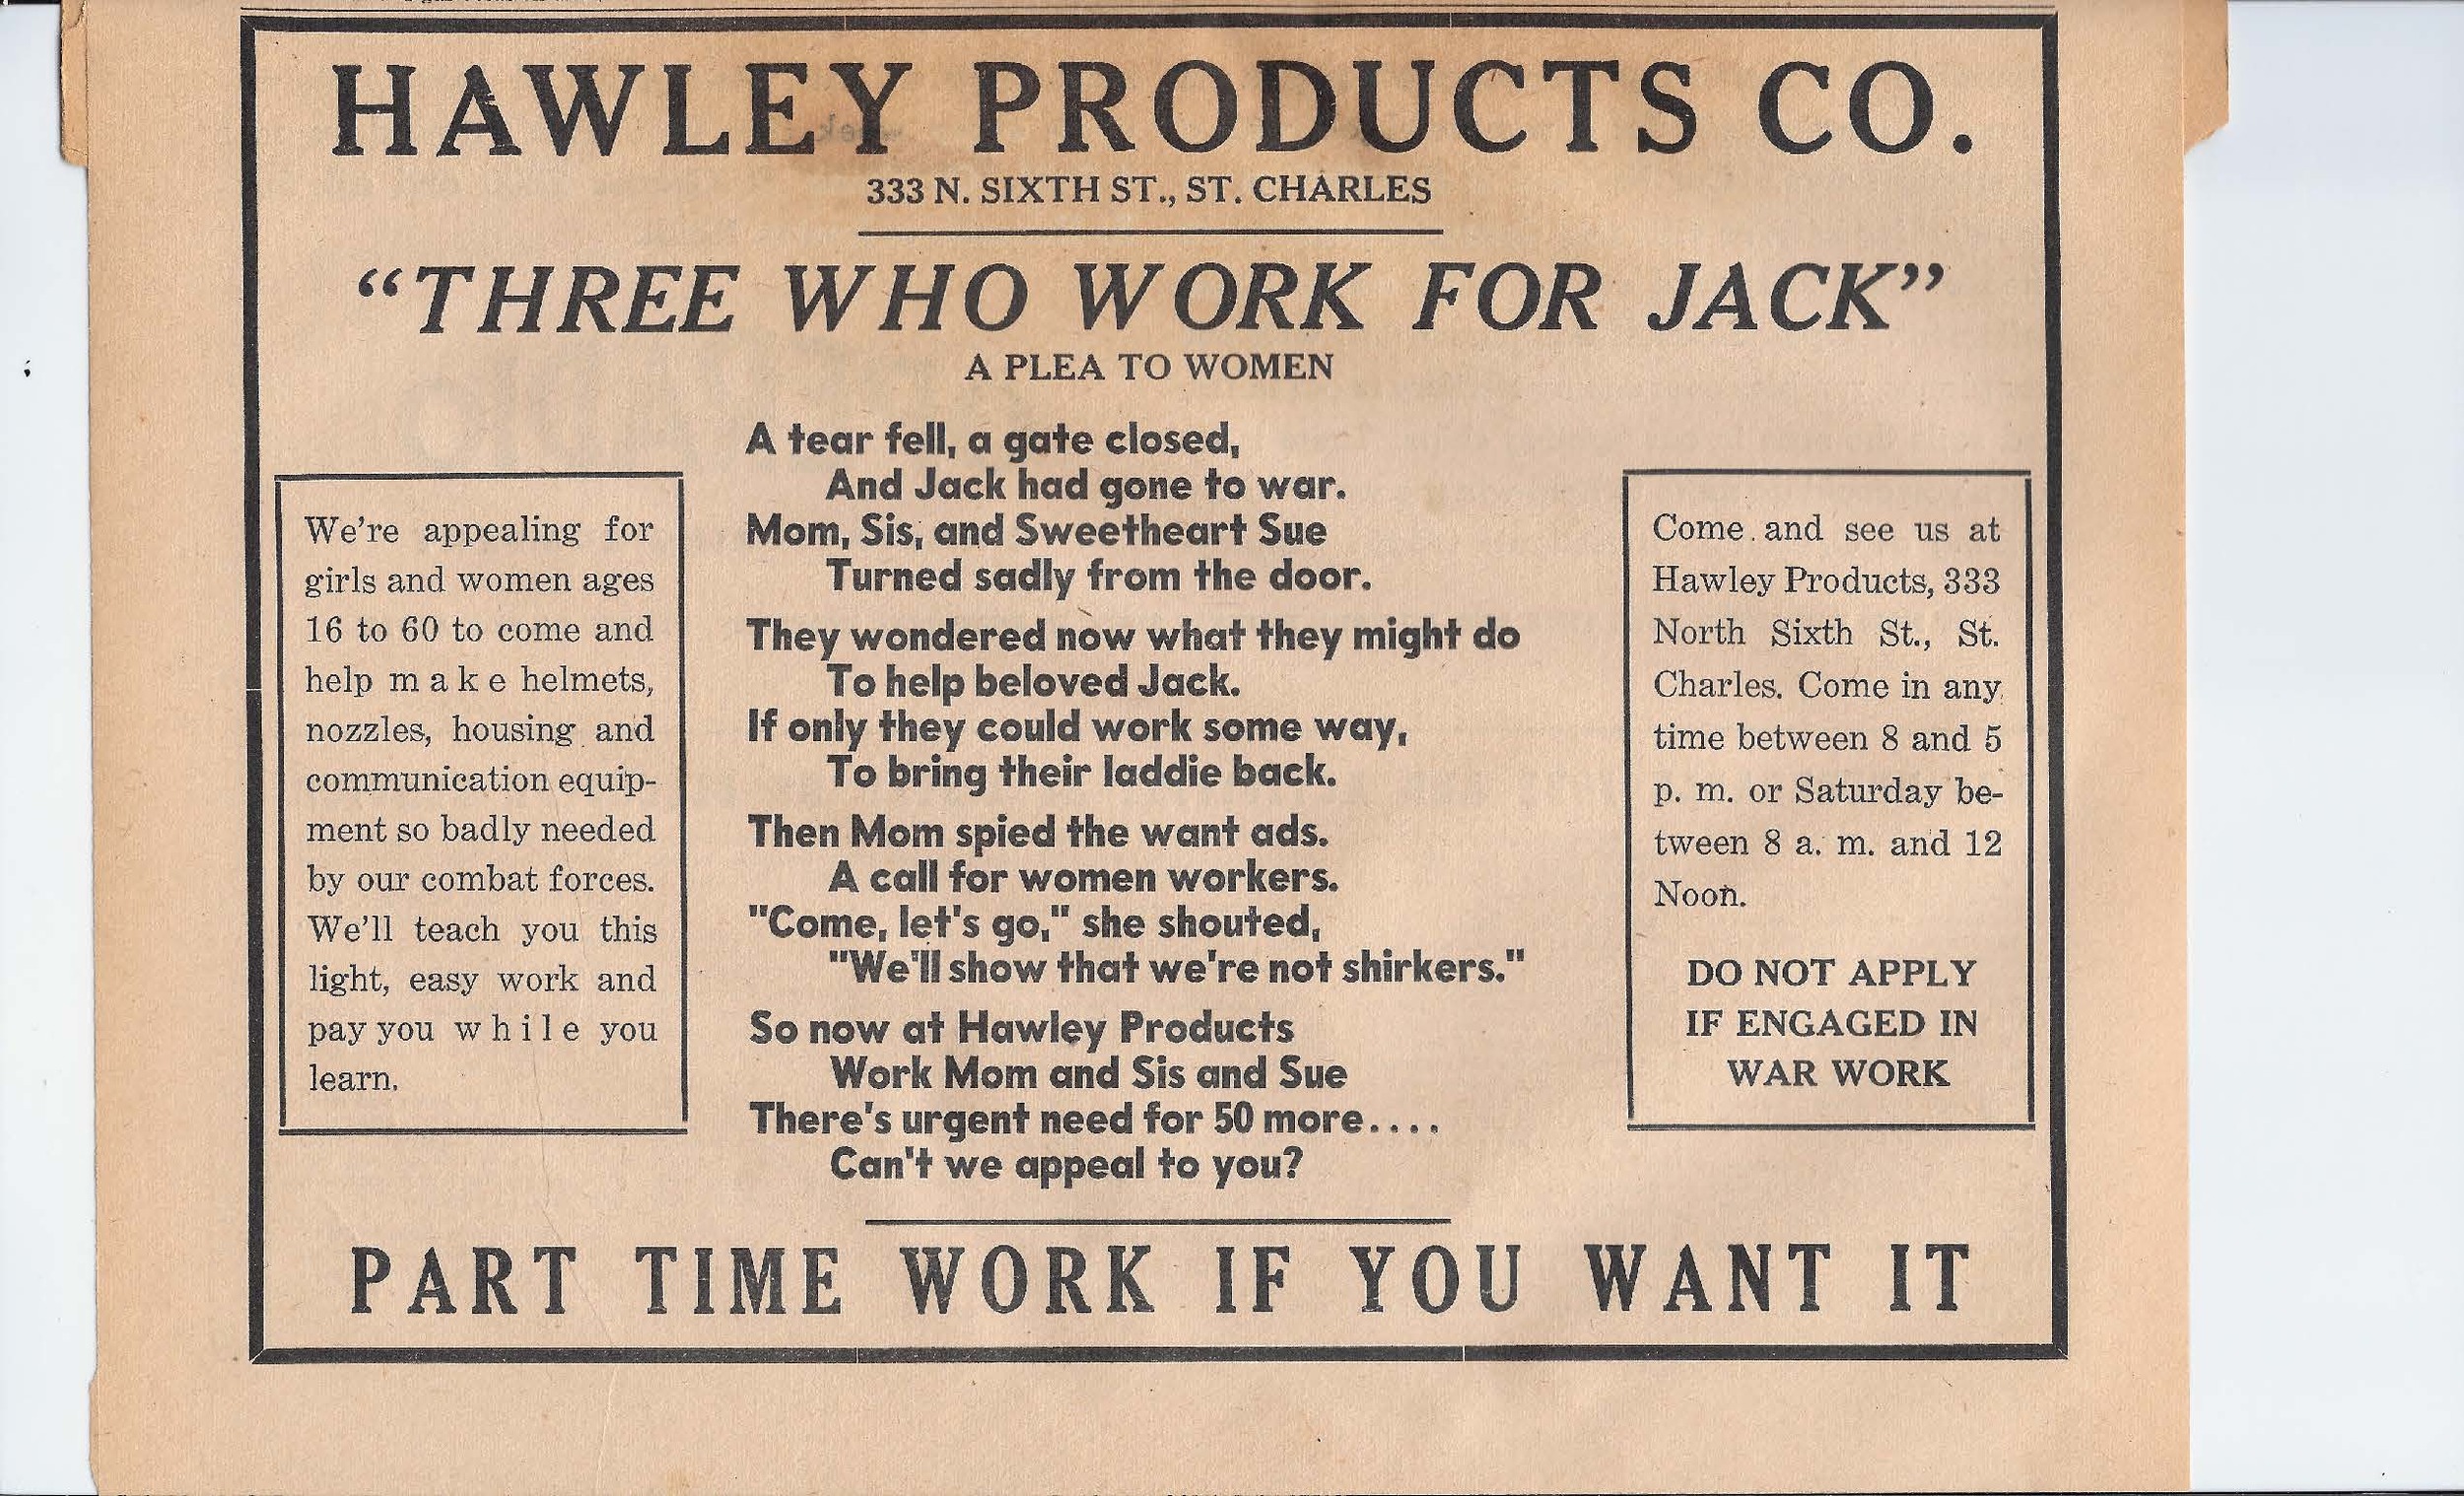 Hawley Products Co. Advertisment